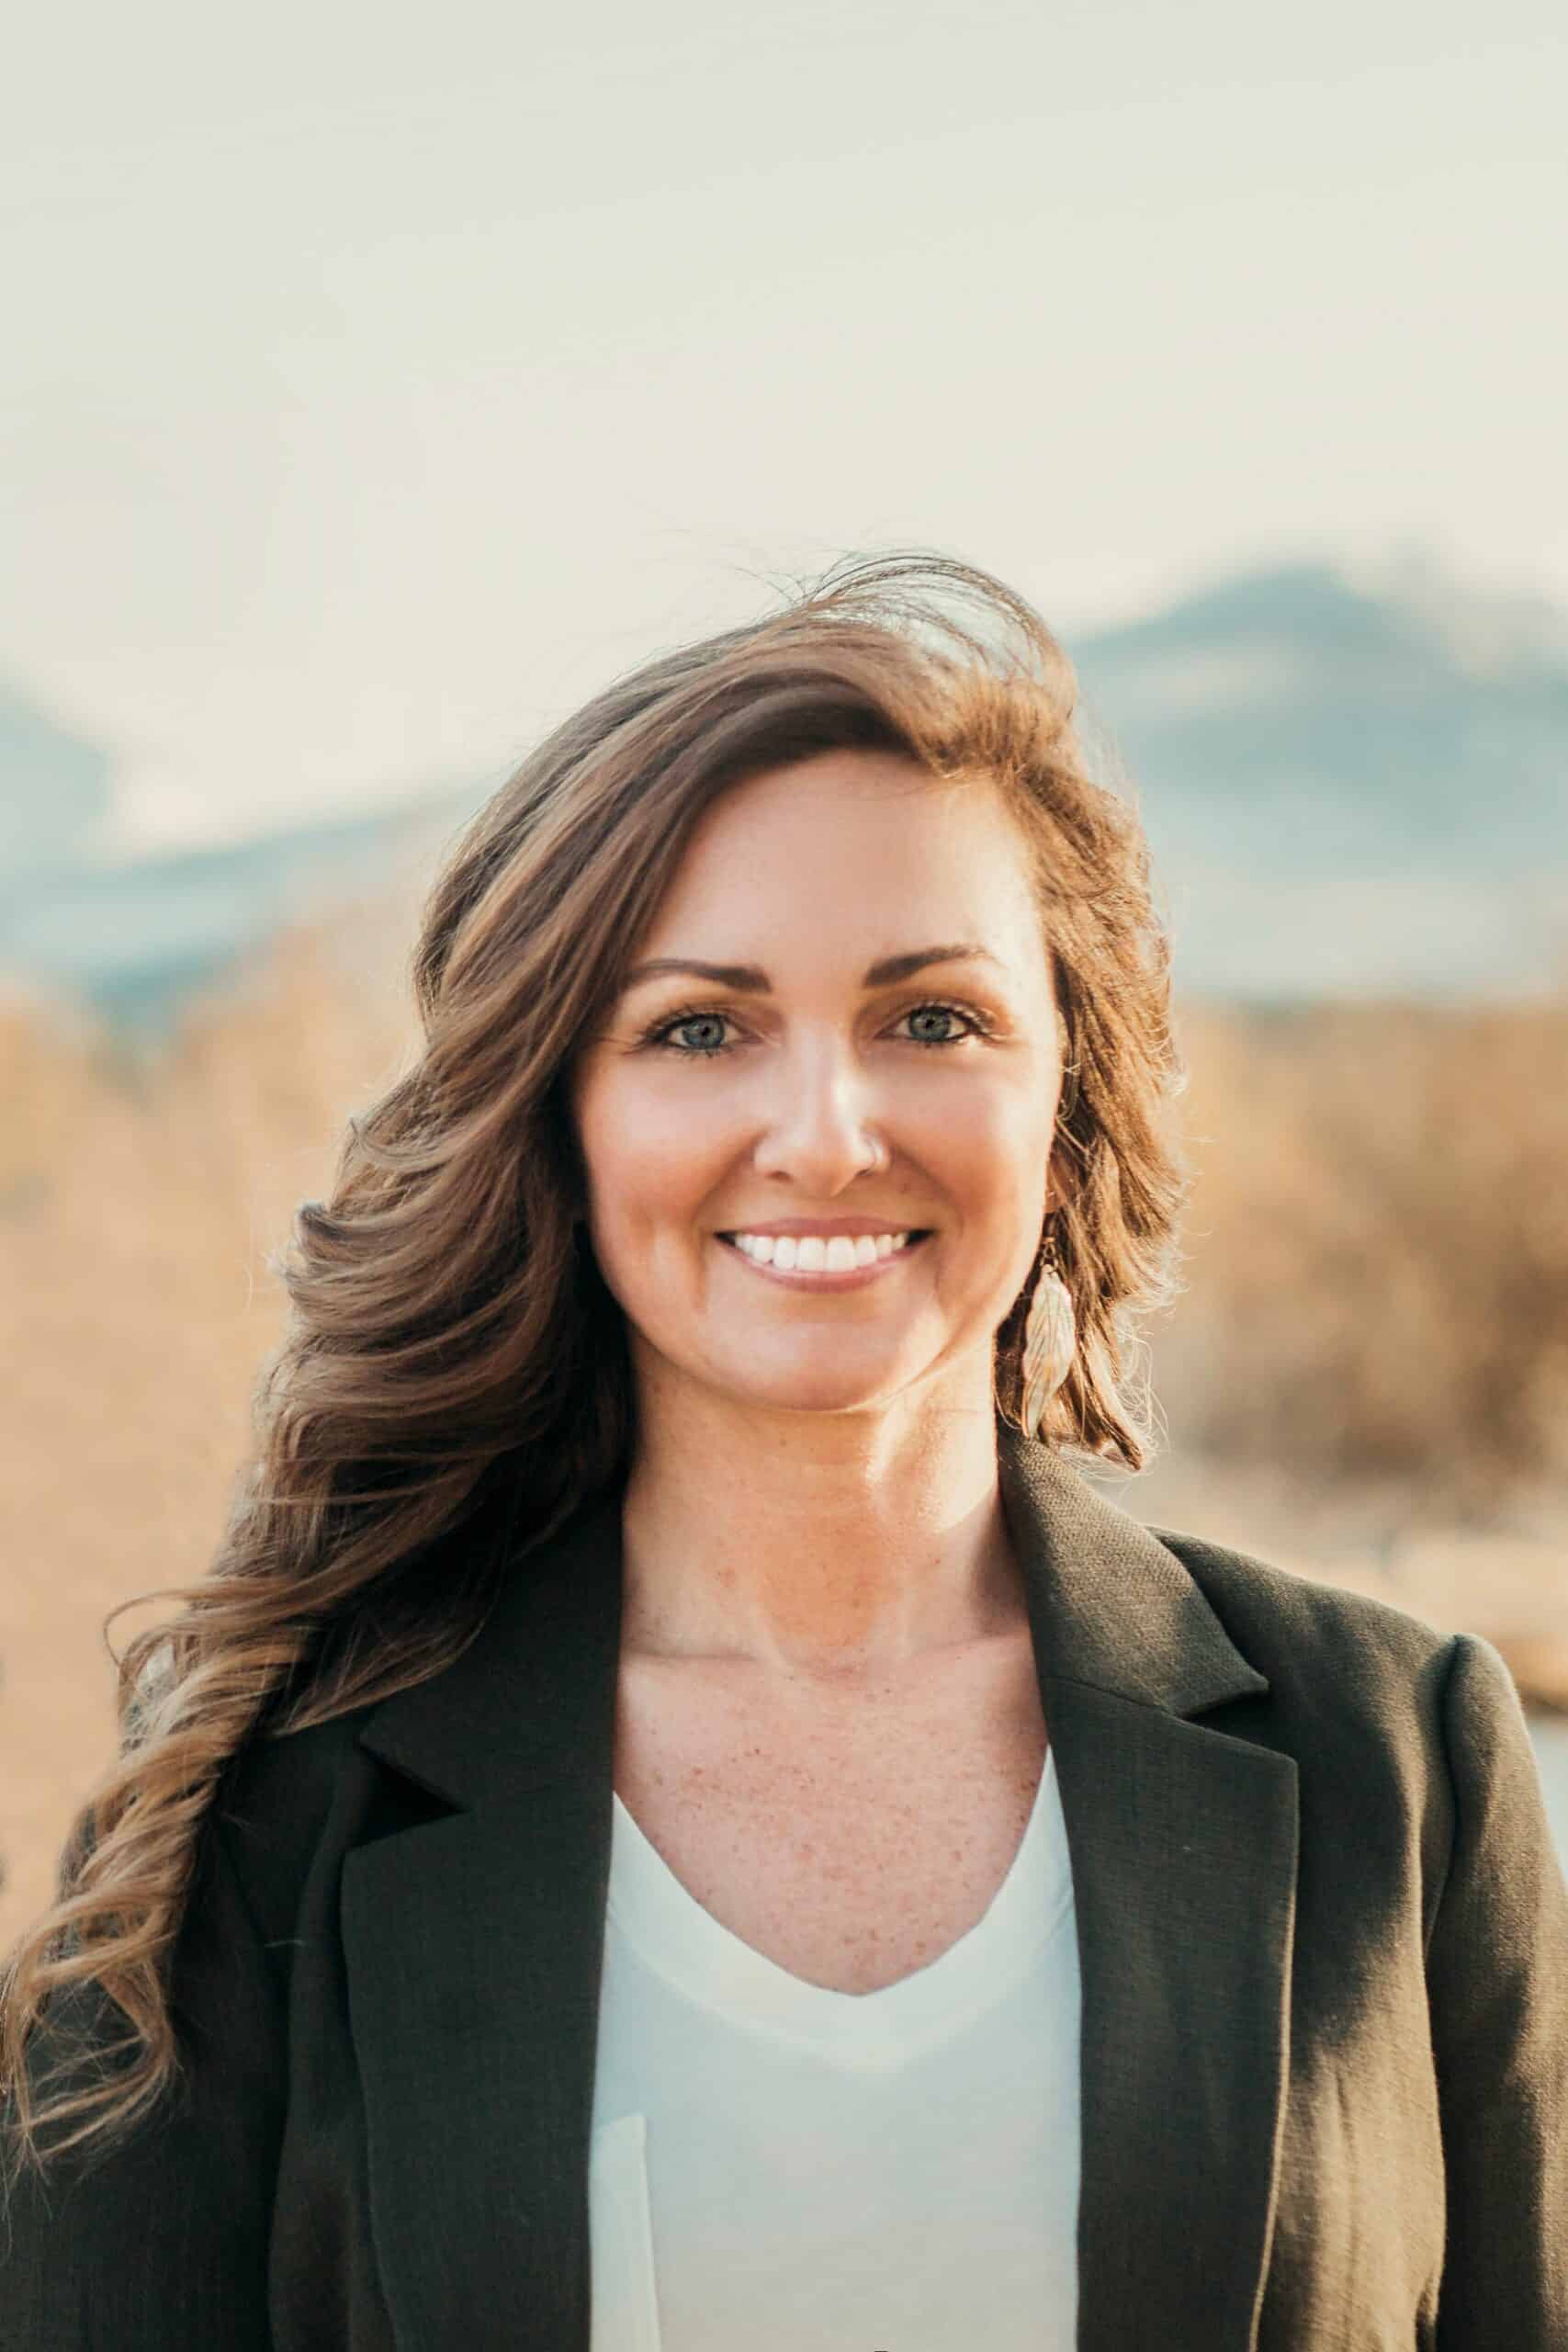 Tiffany Hubbard, Central Oregon Real Estate Broker with Stellar Realty NW